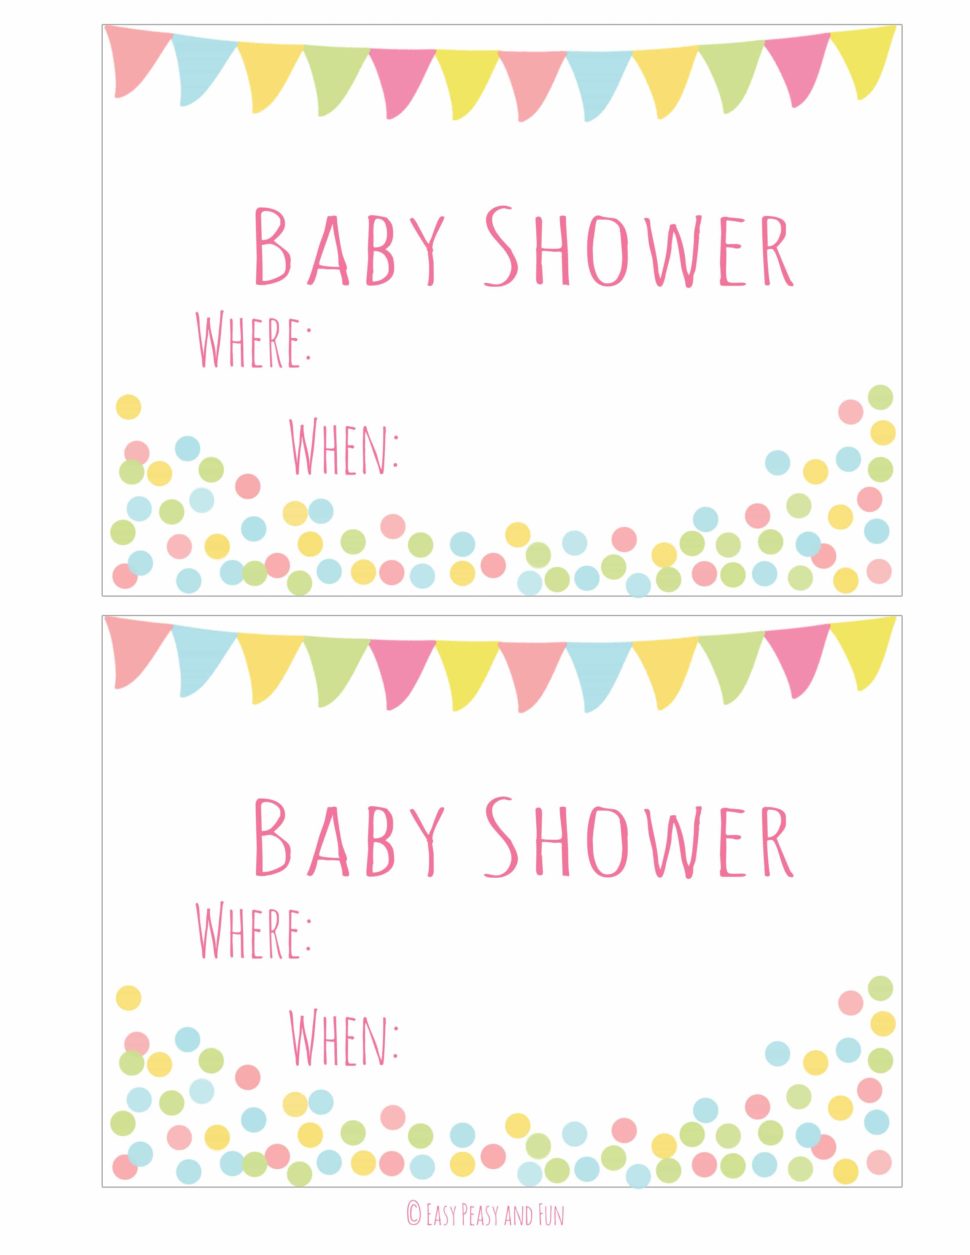 Medium Size of Baby Shower:free Printable Baby Shower Games Elegant Baby Shower Baby Shower Centerpiece Ideas For Boys Nursery For Girls Cheap Invitations Baby Shower Homemade Baby Shower Decorations Baby Shower Centerpiece Ideas For Boys Homemade Baby Shower Centerpieces